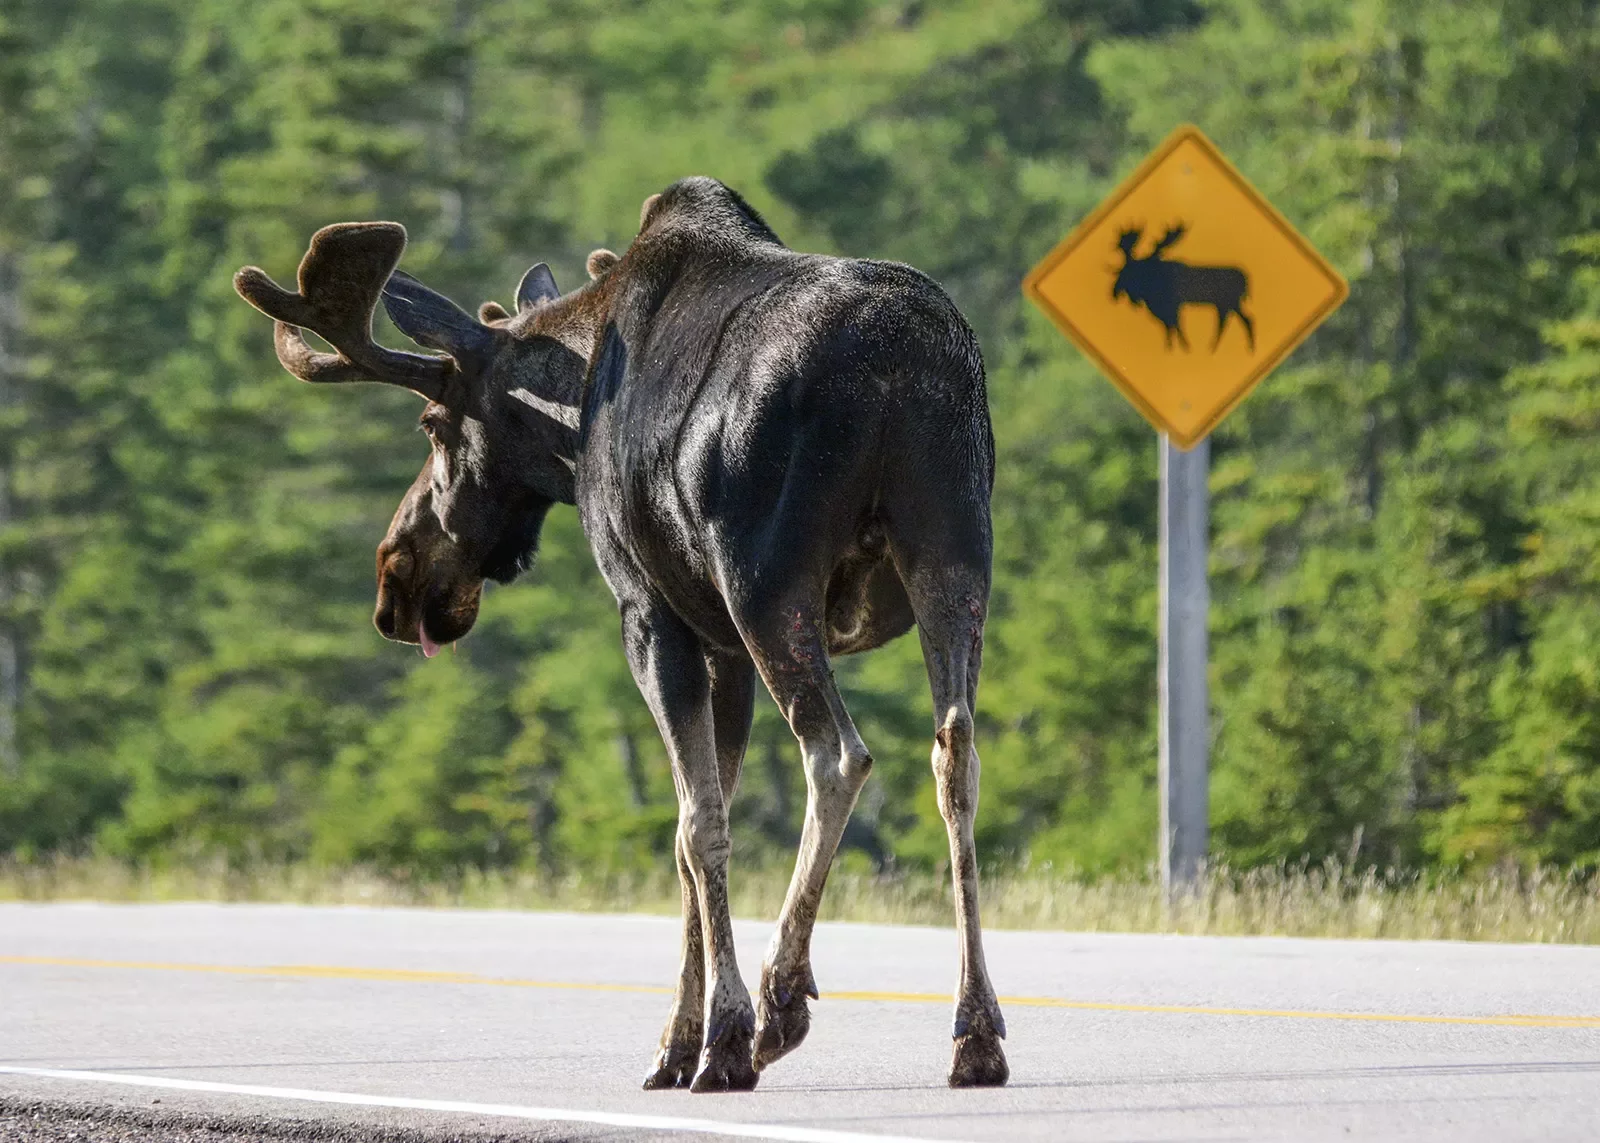 Large moose, &quot;MOOSE X-ING&quot; sign behind it.